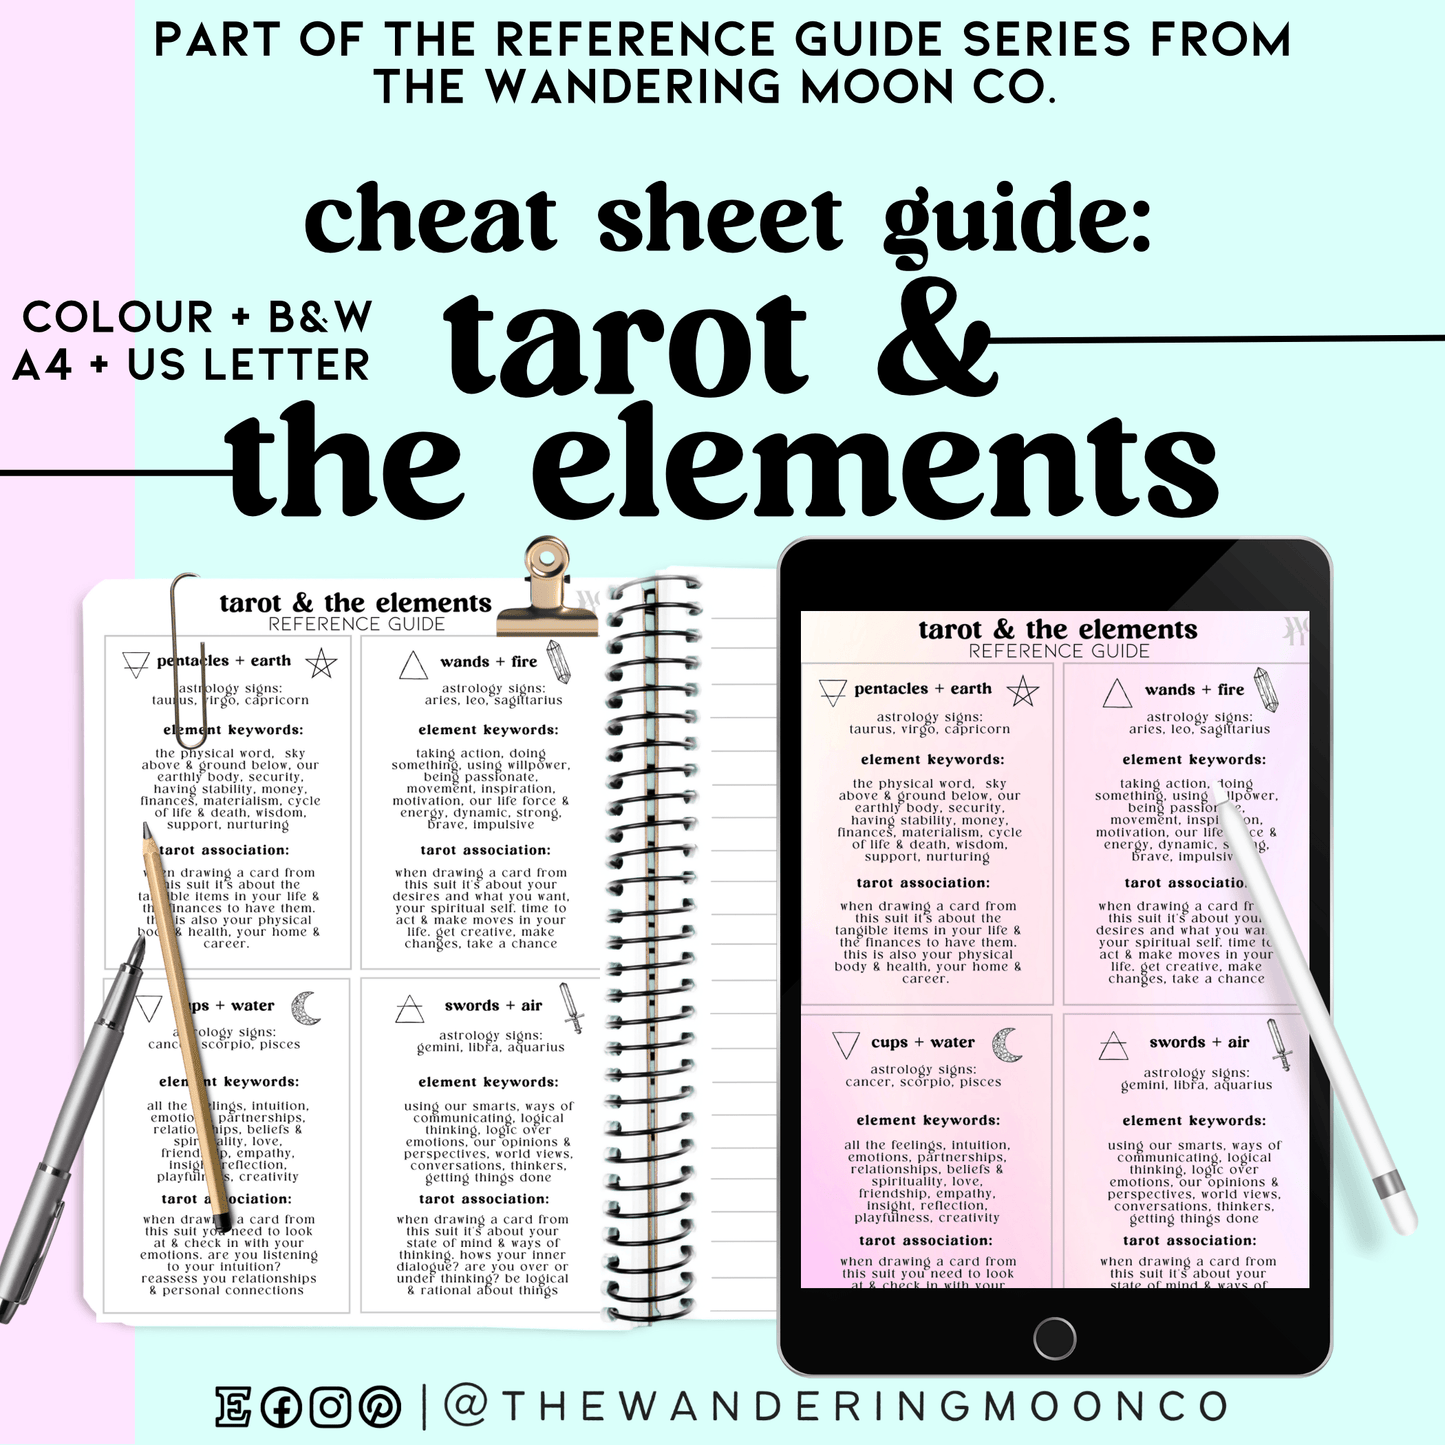 Tarot and the Elements reference chart guide cheat sheet download - The Wandering Moon Co.